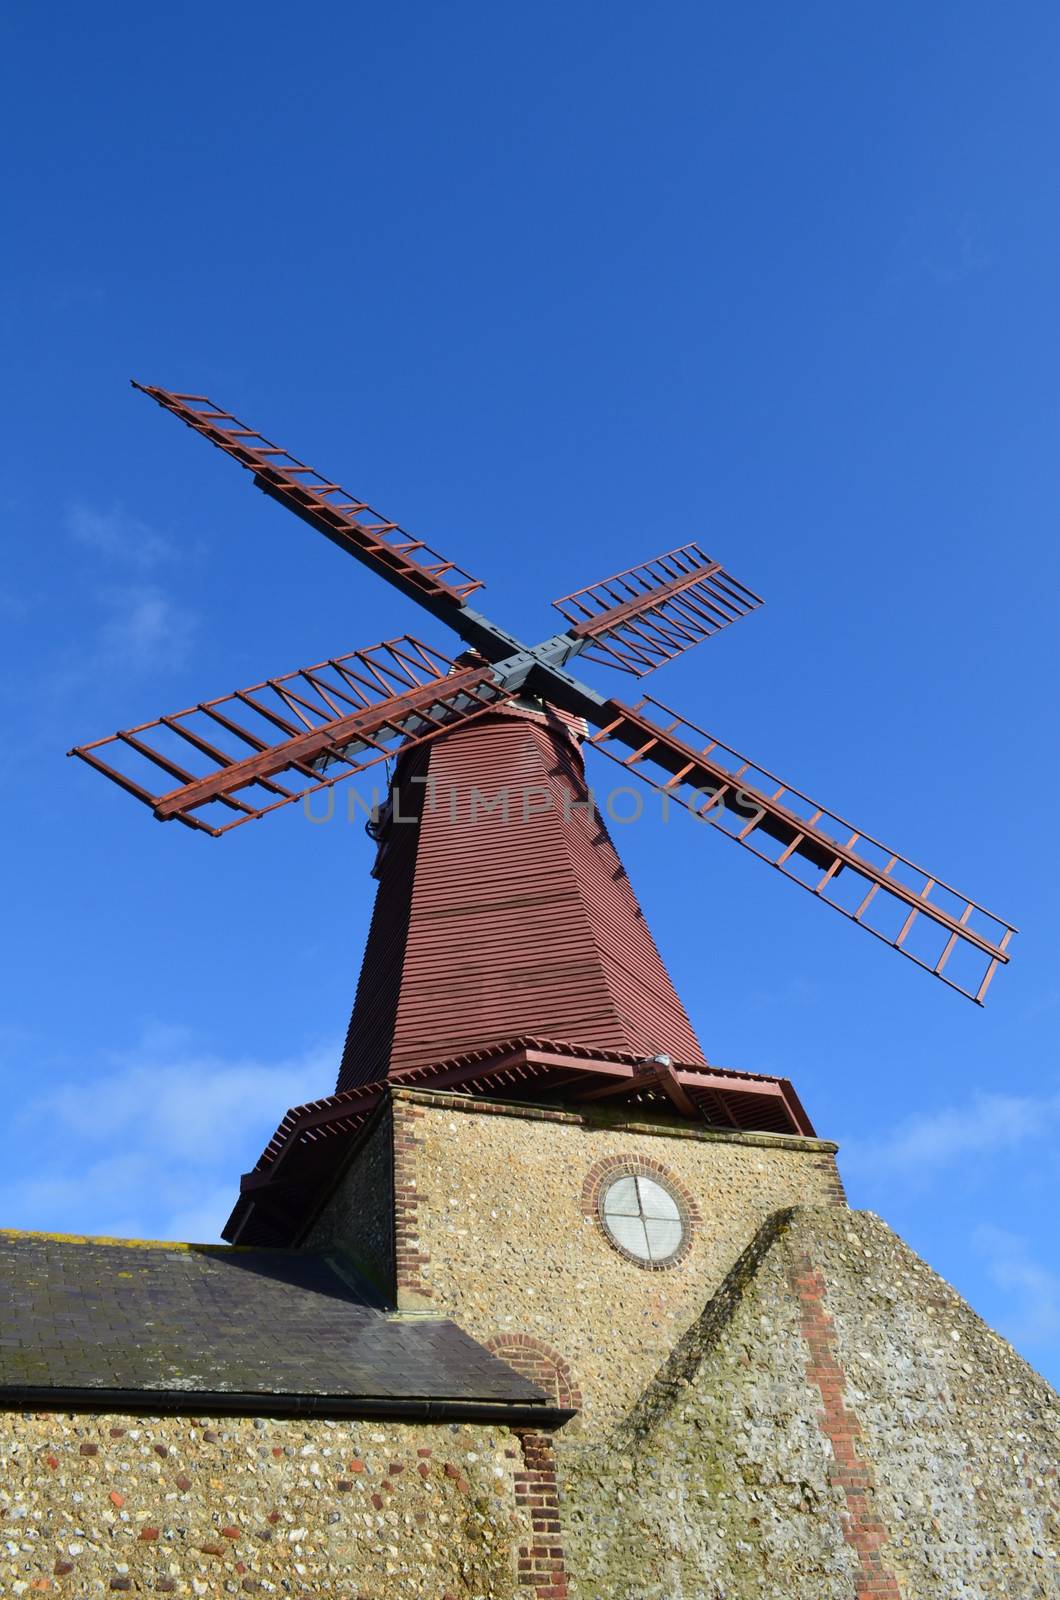 West Blatchington Windmill near Brighton,Sussex,England.Built in the 1820's and was painted by the famous artist John Constable in 1825.